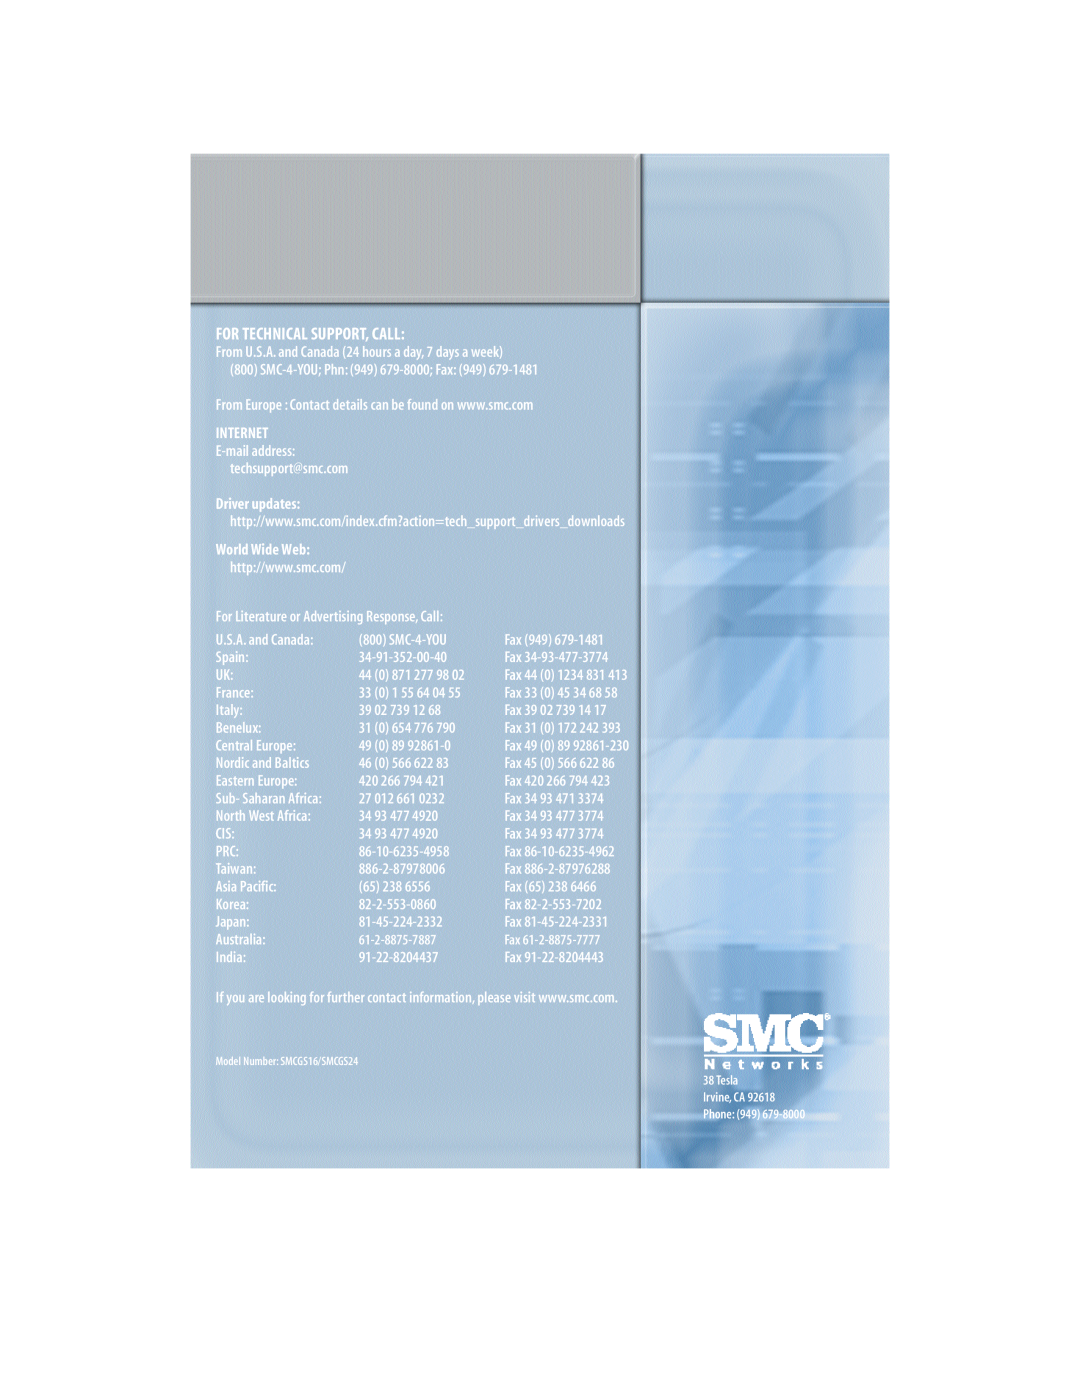 SMC Networks SMCGS24 manual For Technical Support, Call, Nordic and Baltics, North West Africa, Fax 65, 61-2-8875-7887 